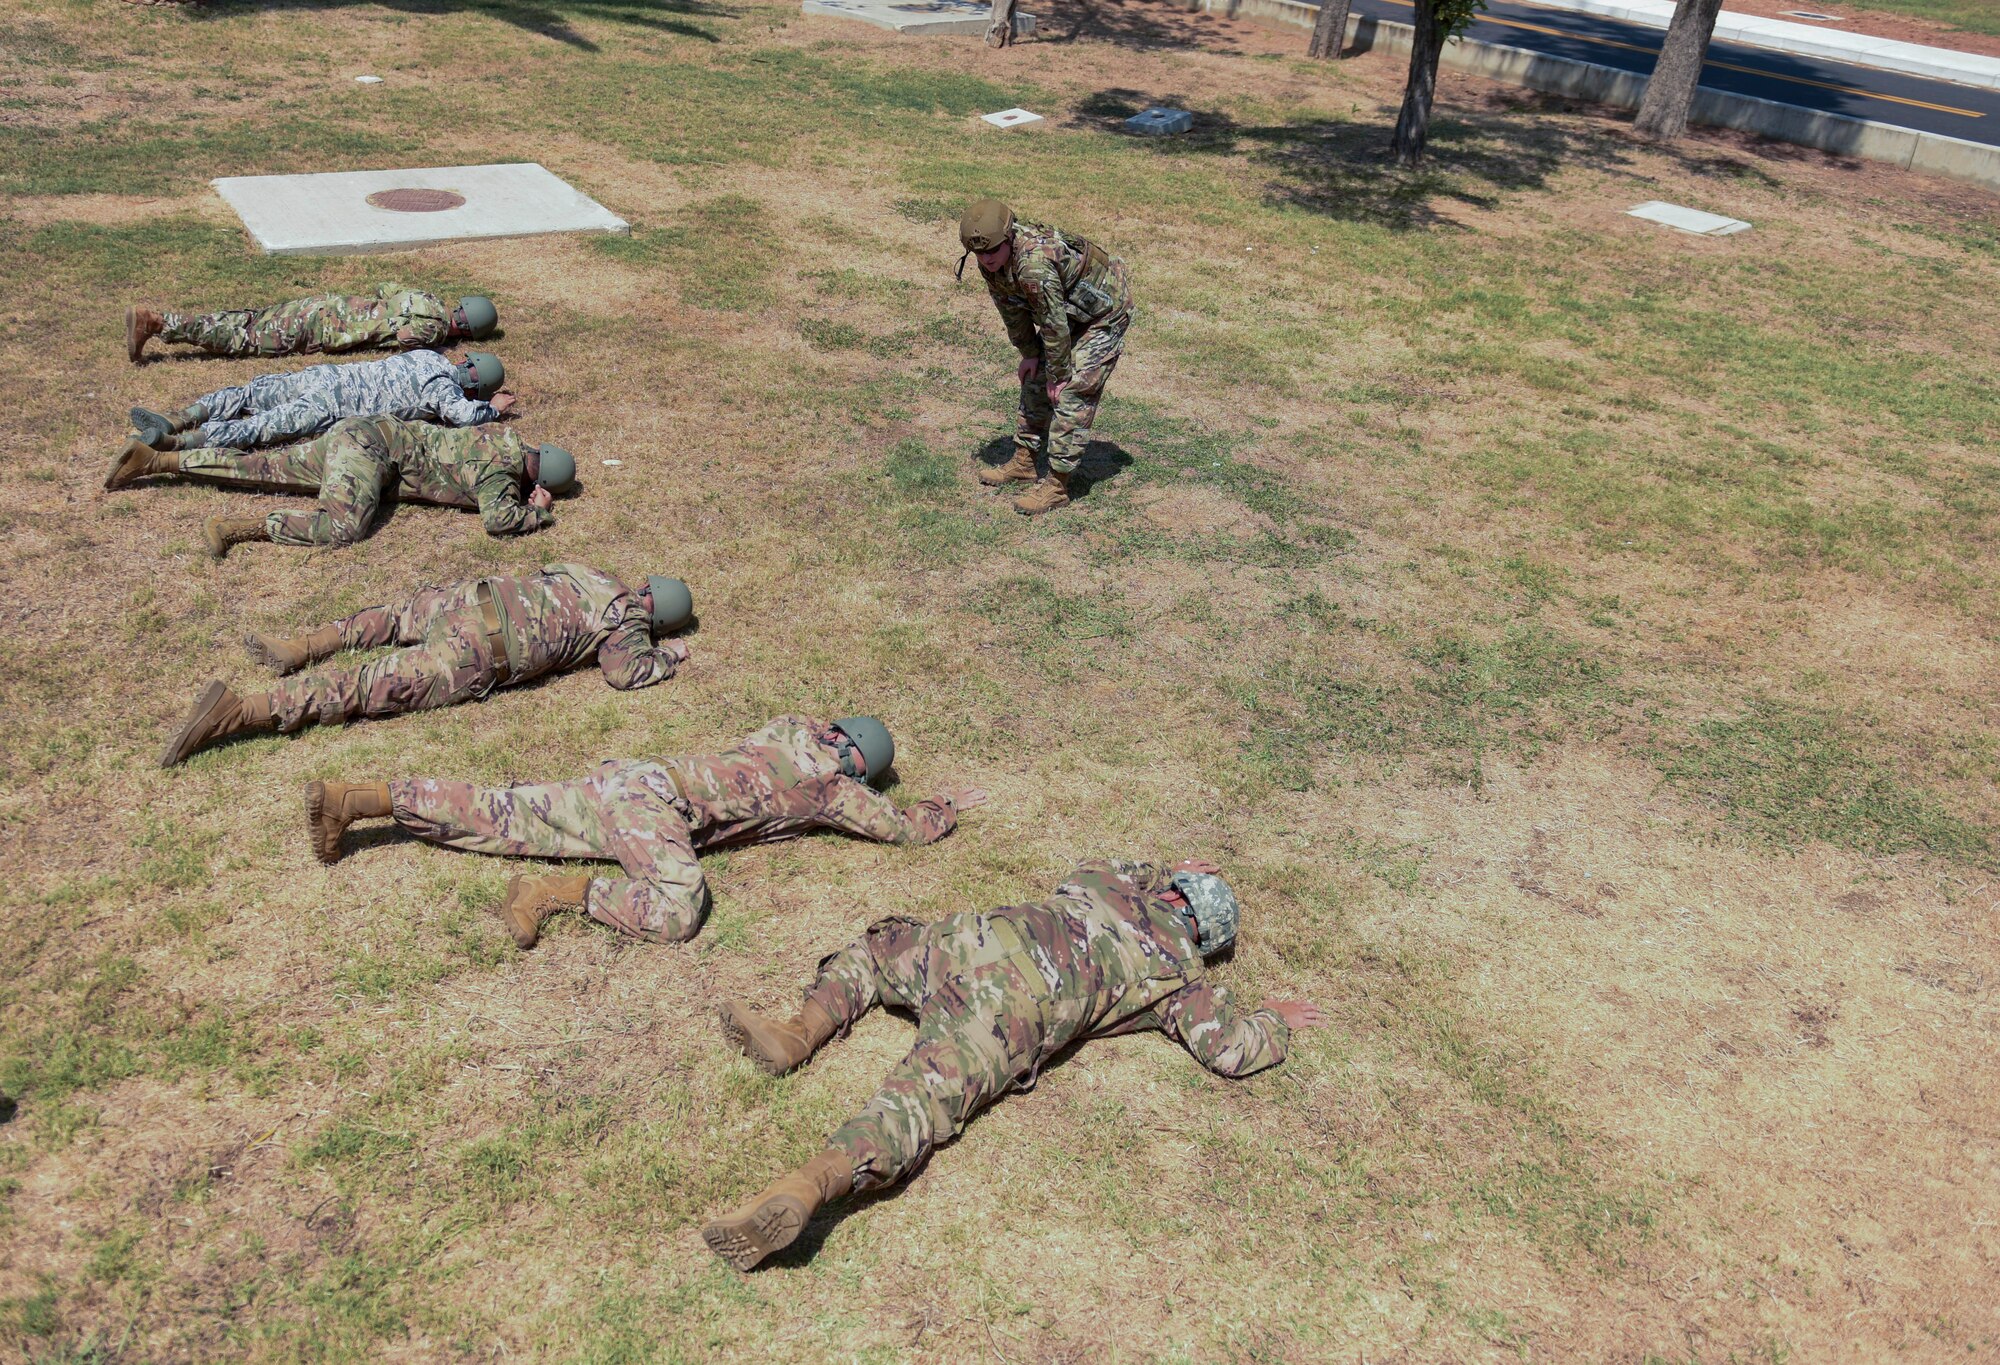 Airmen laying in prone position outside